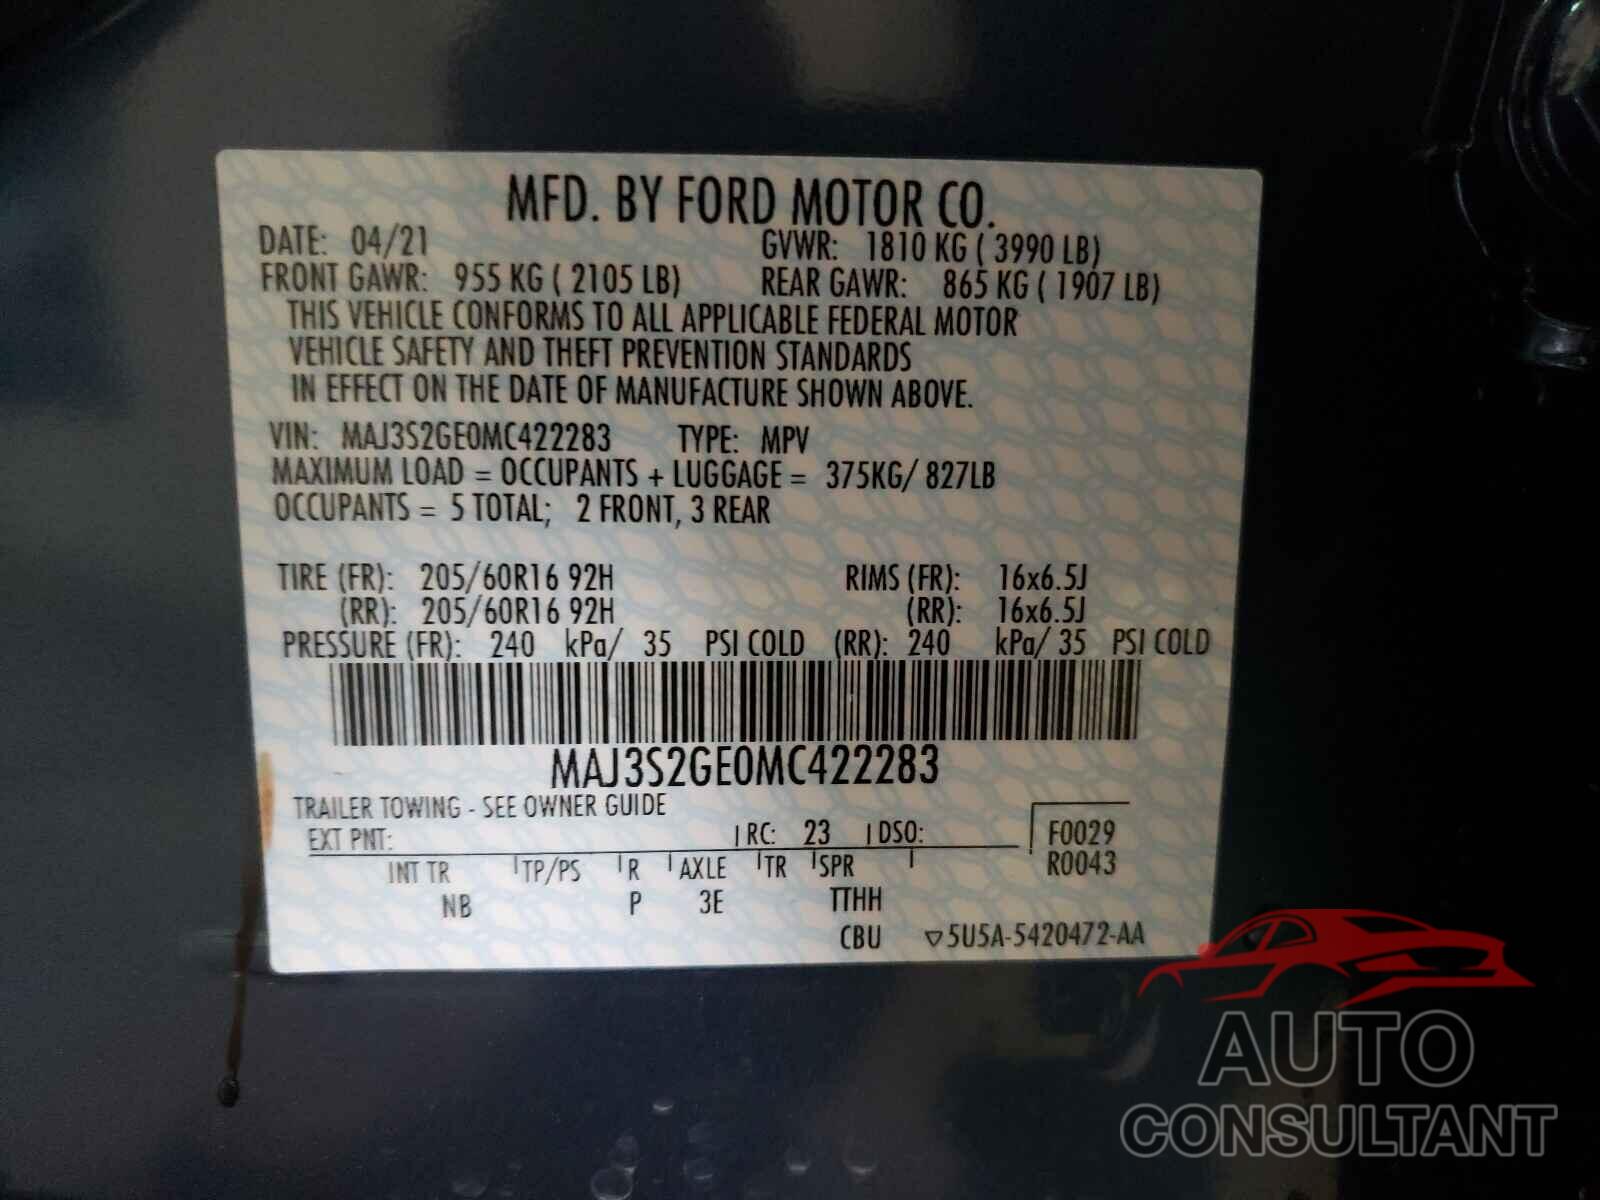 FORD ALL OTHER 2021 - MAJ3S2GE0MC422283